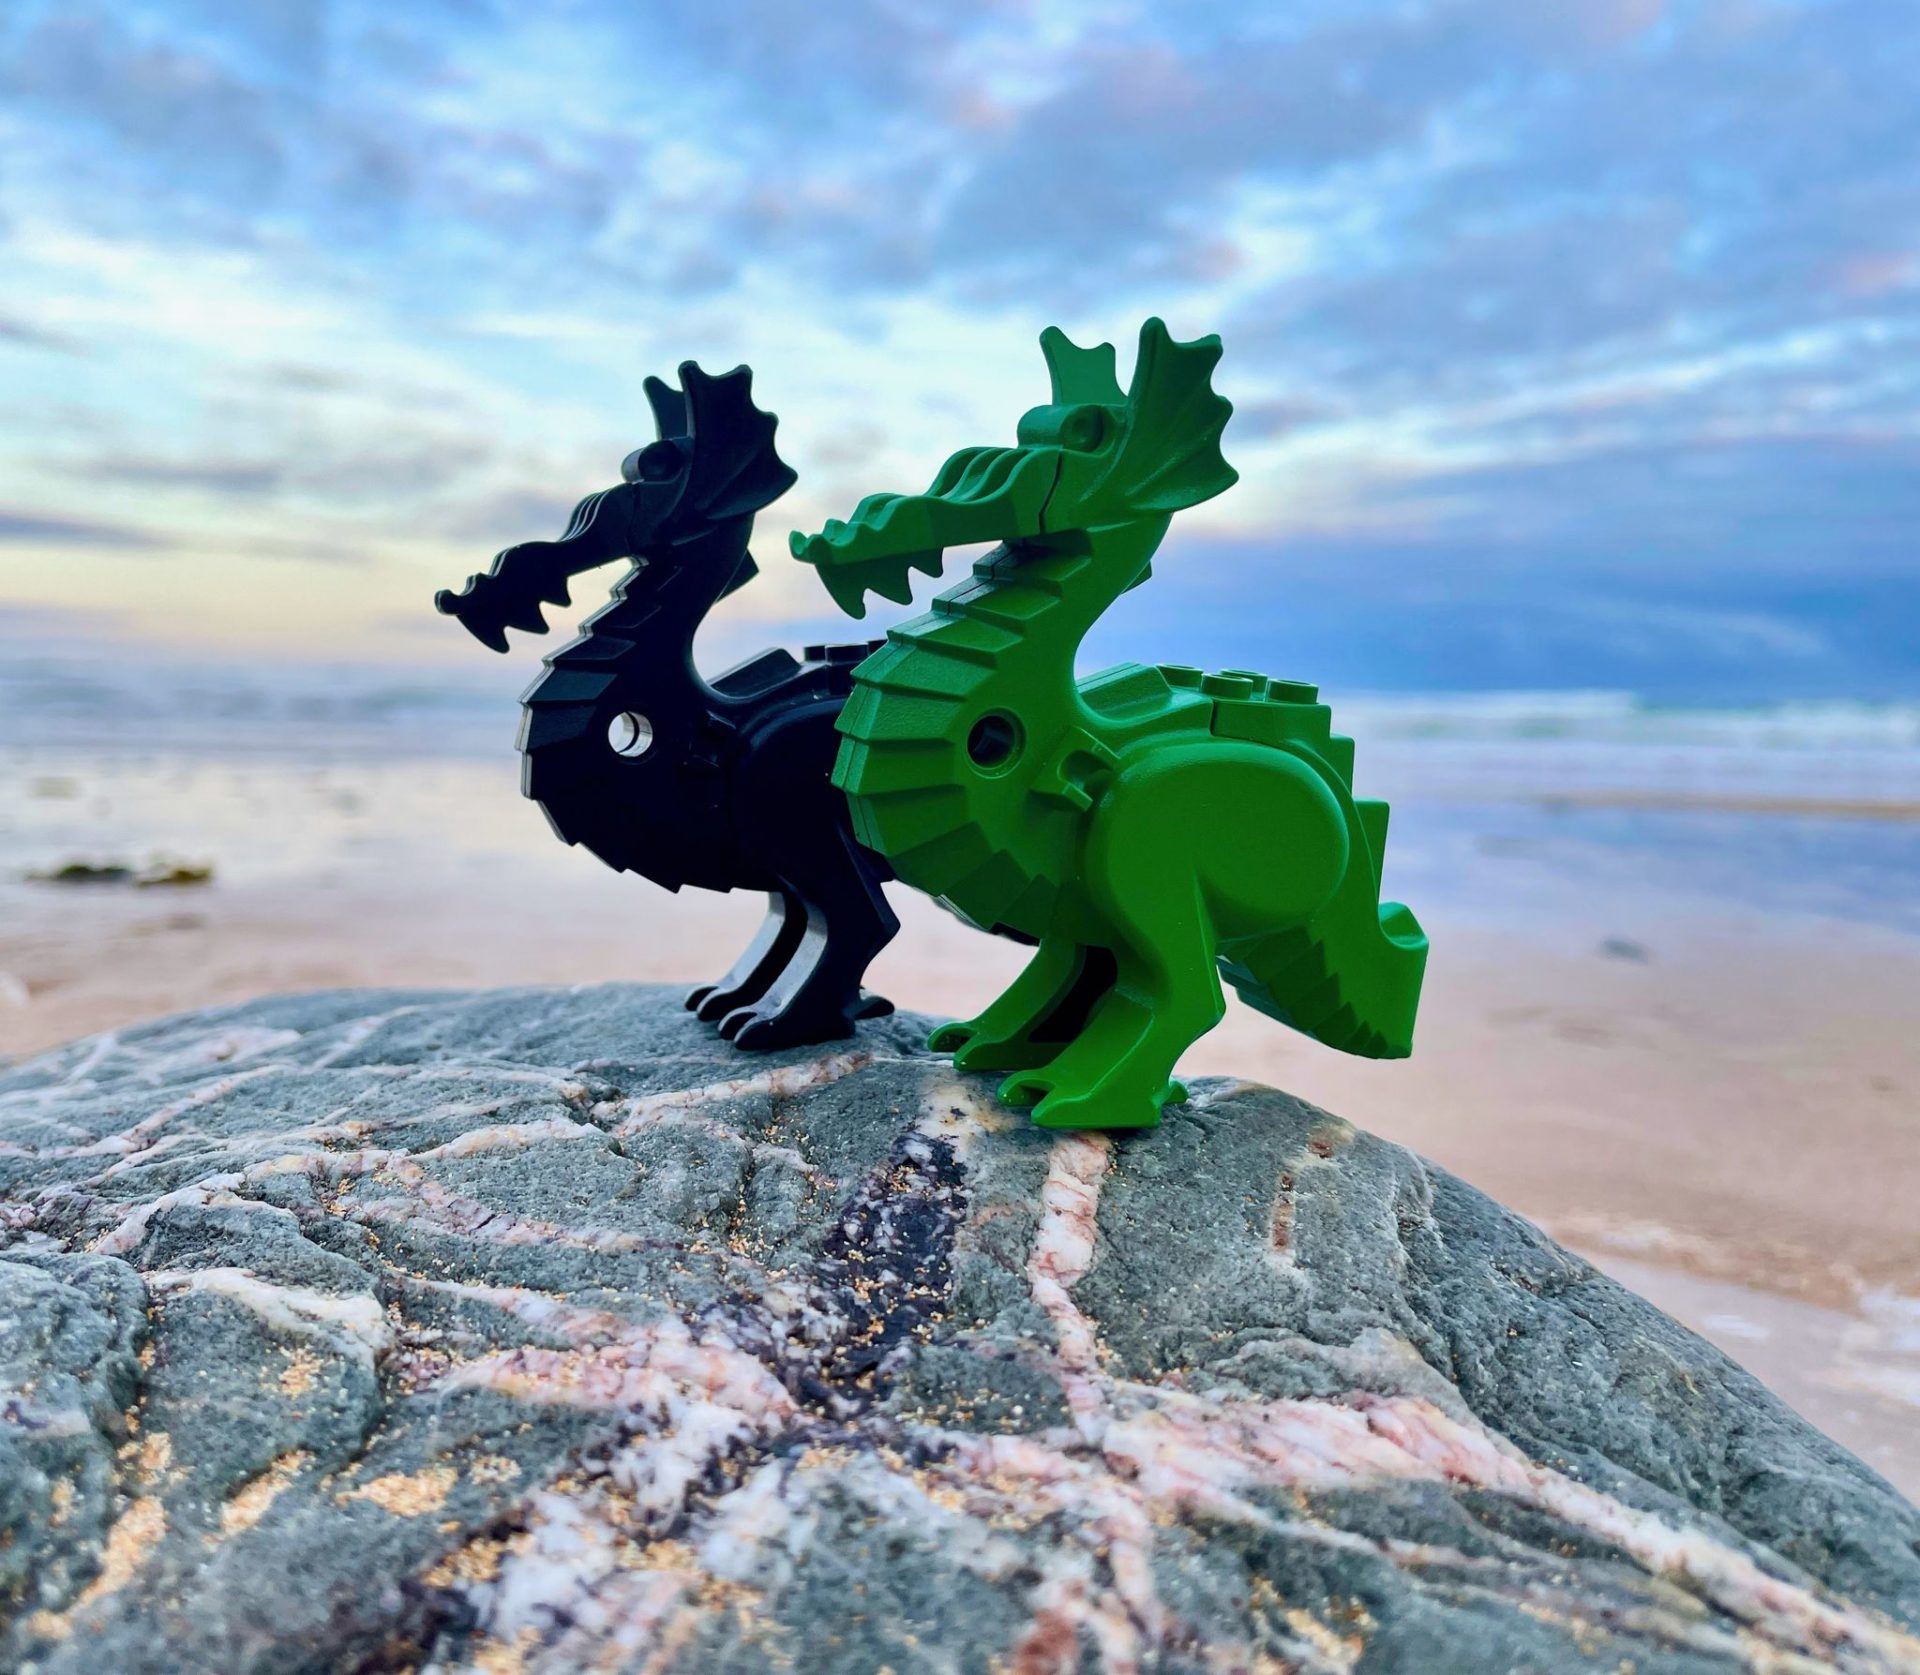 Some of the lost Lego pieces that have washed up on beaches